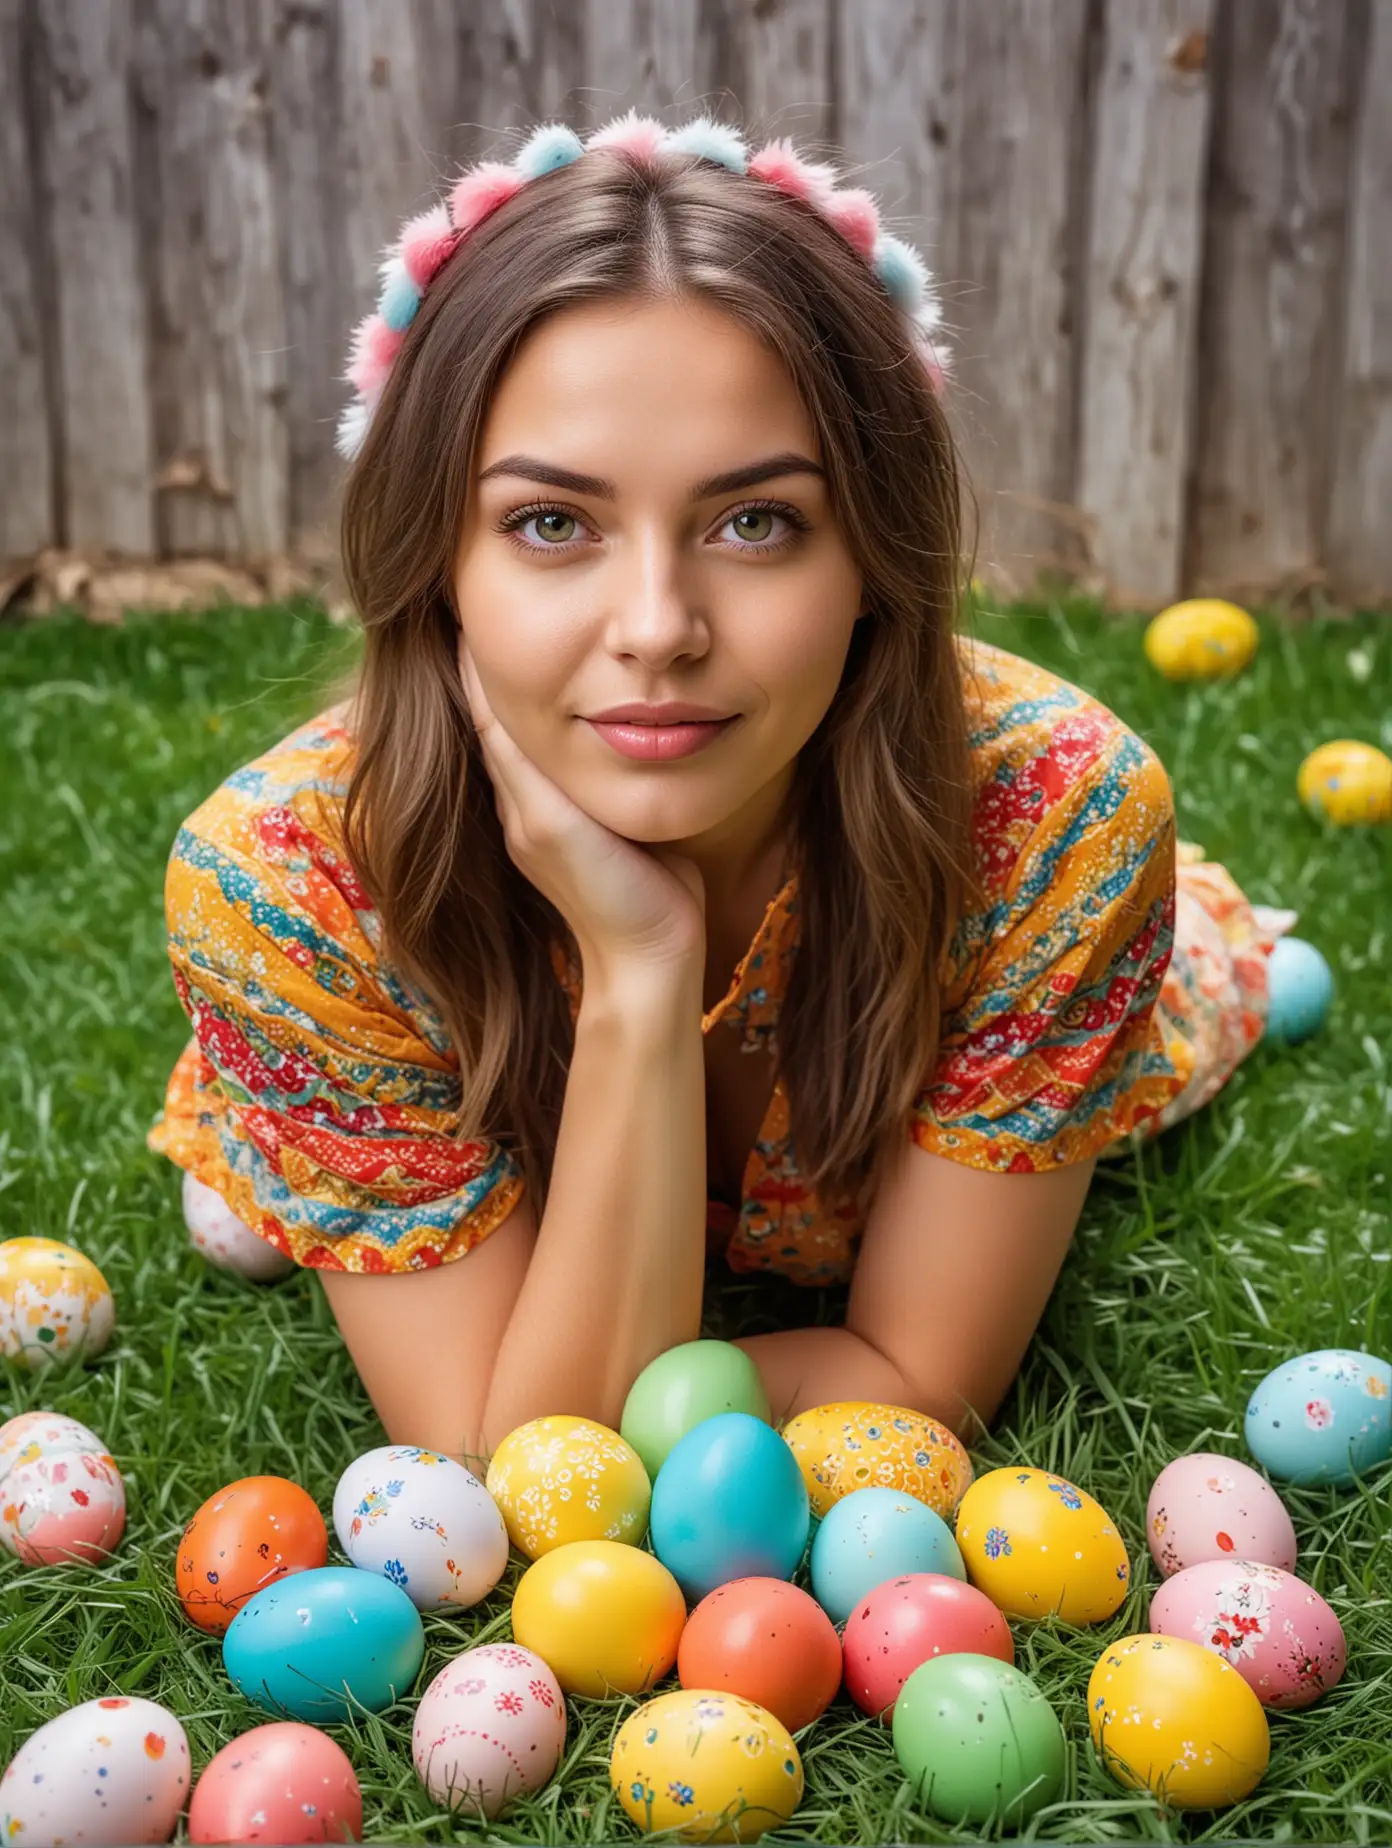 Sexy Ukrainian girl with exquisite facial features, Easter themed clothes,Green grass, colorful eggs, mischievous and lovely actions, facing the camera, professional photography technology, full body photo